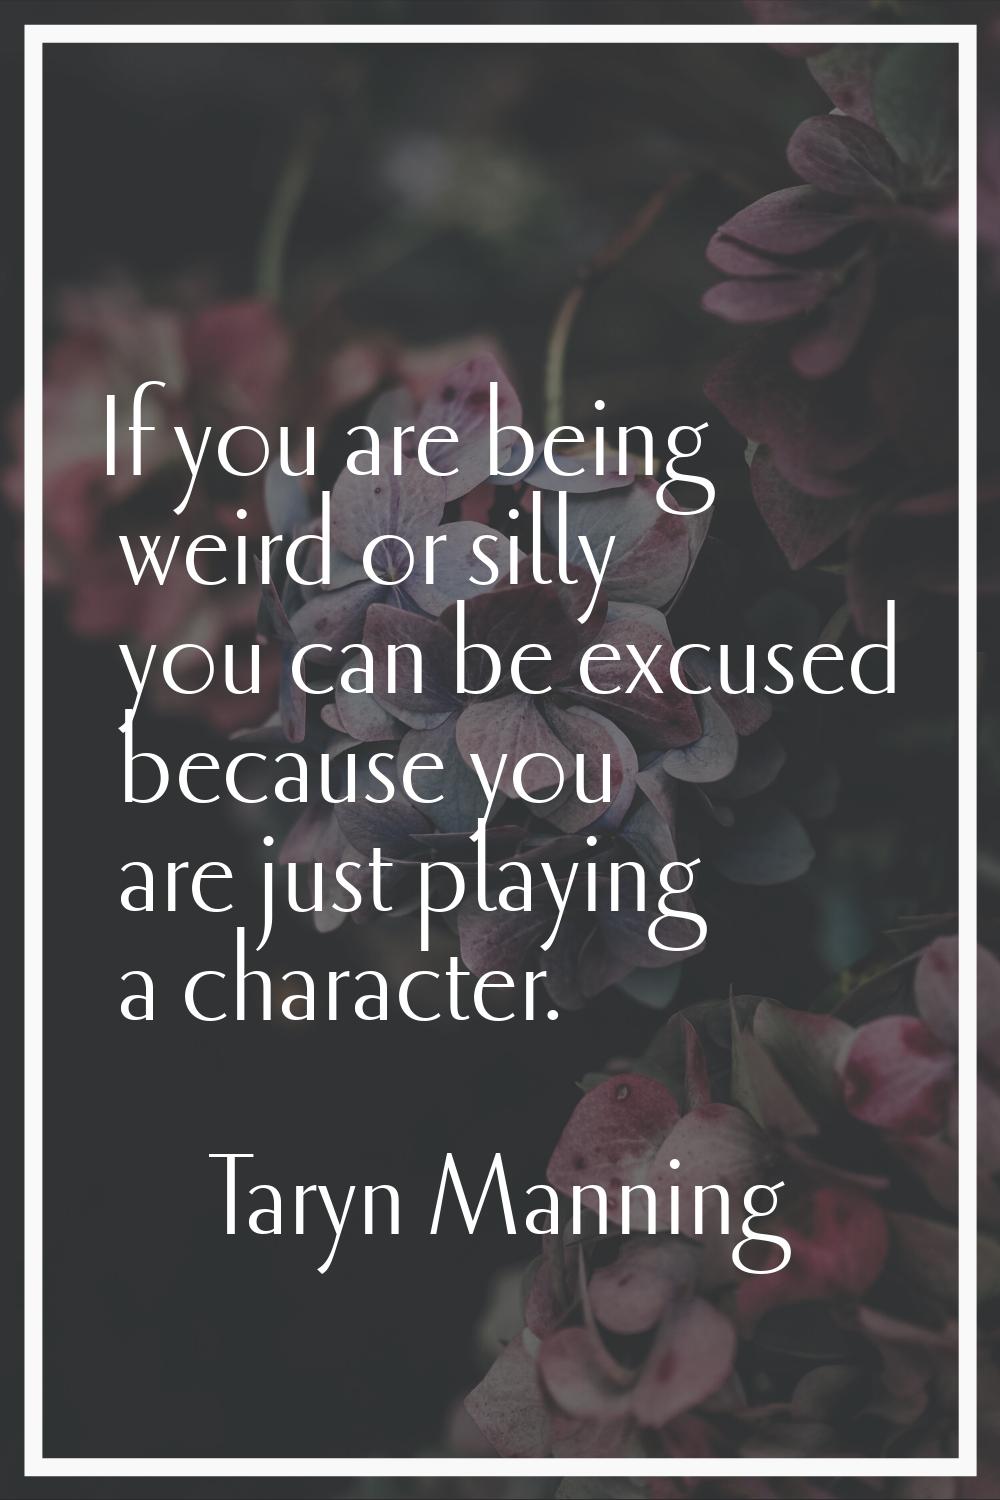 If you are being weird or silly you can be excused because you are just playing a character.